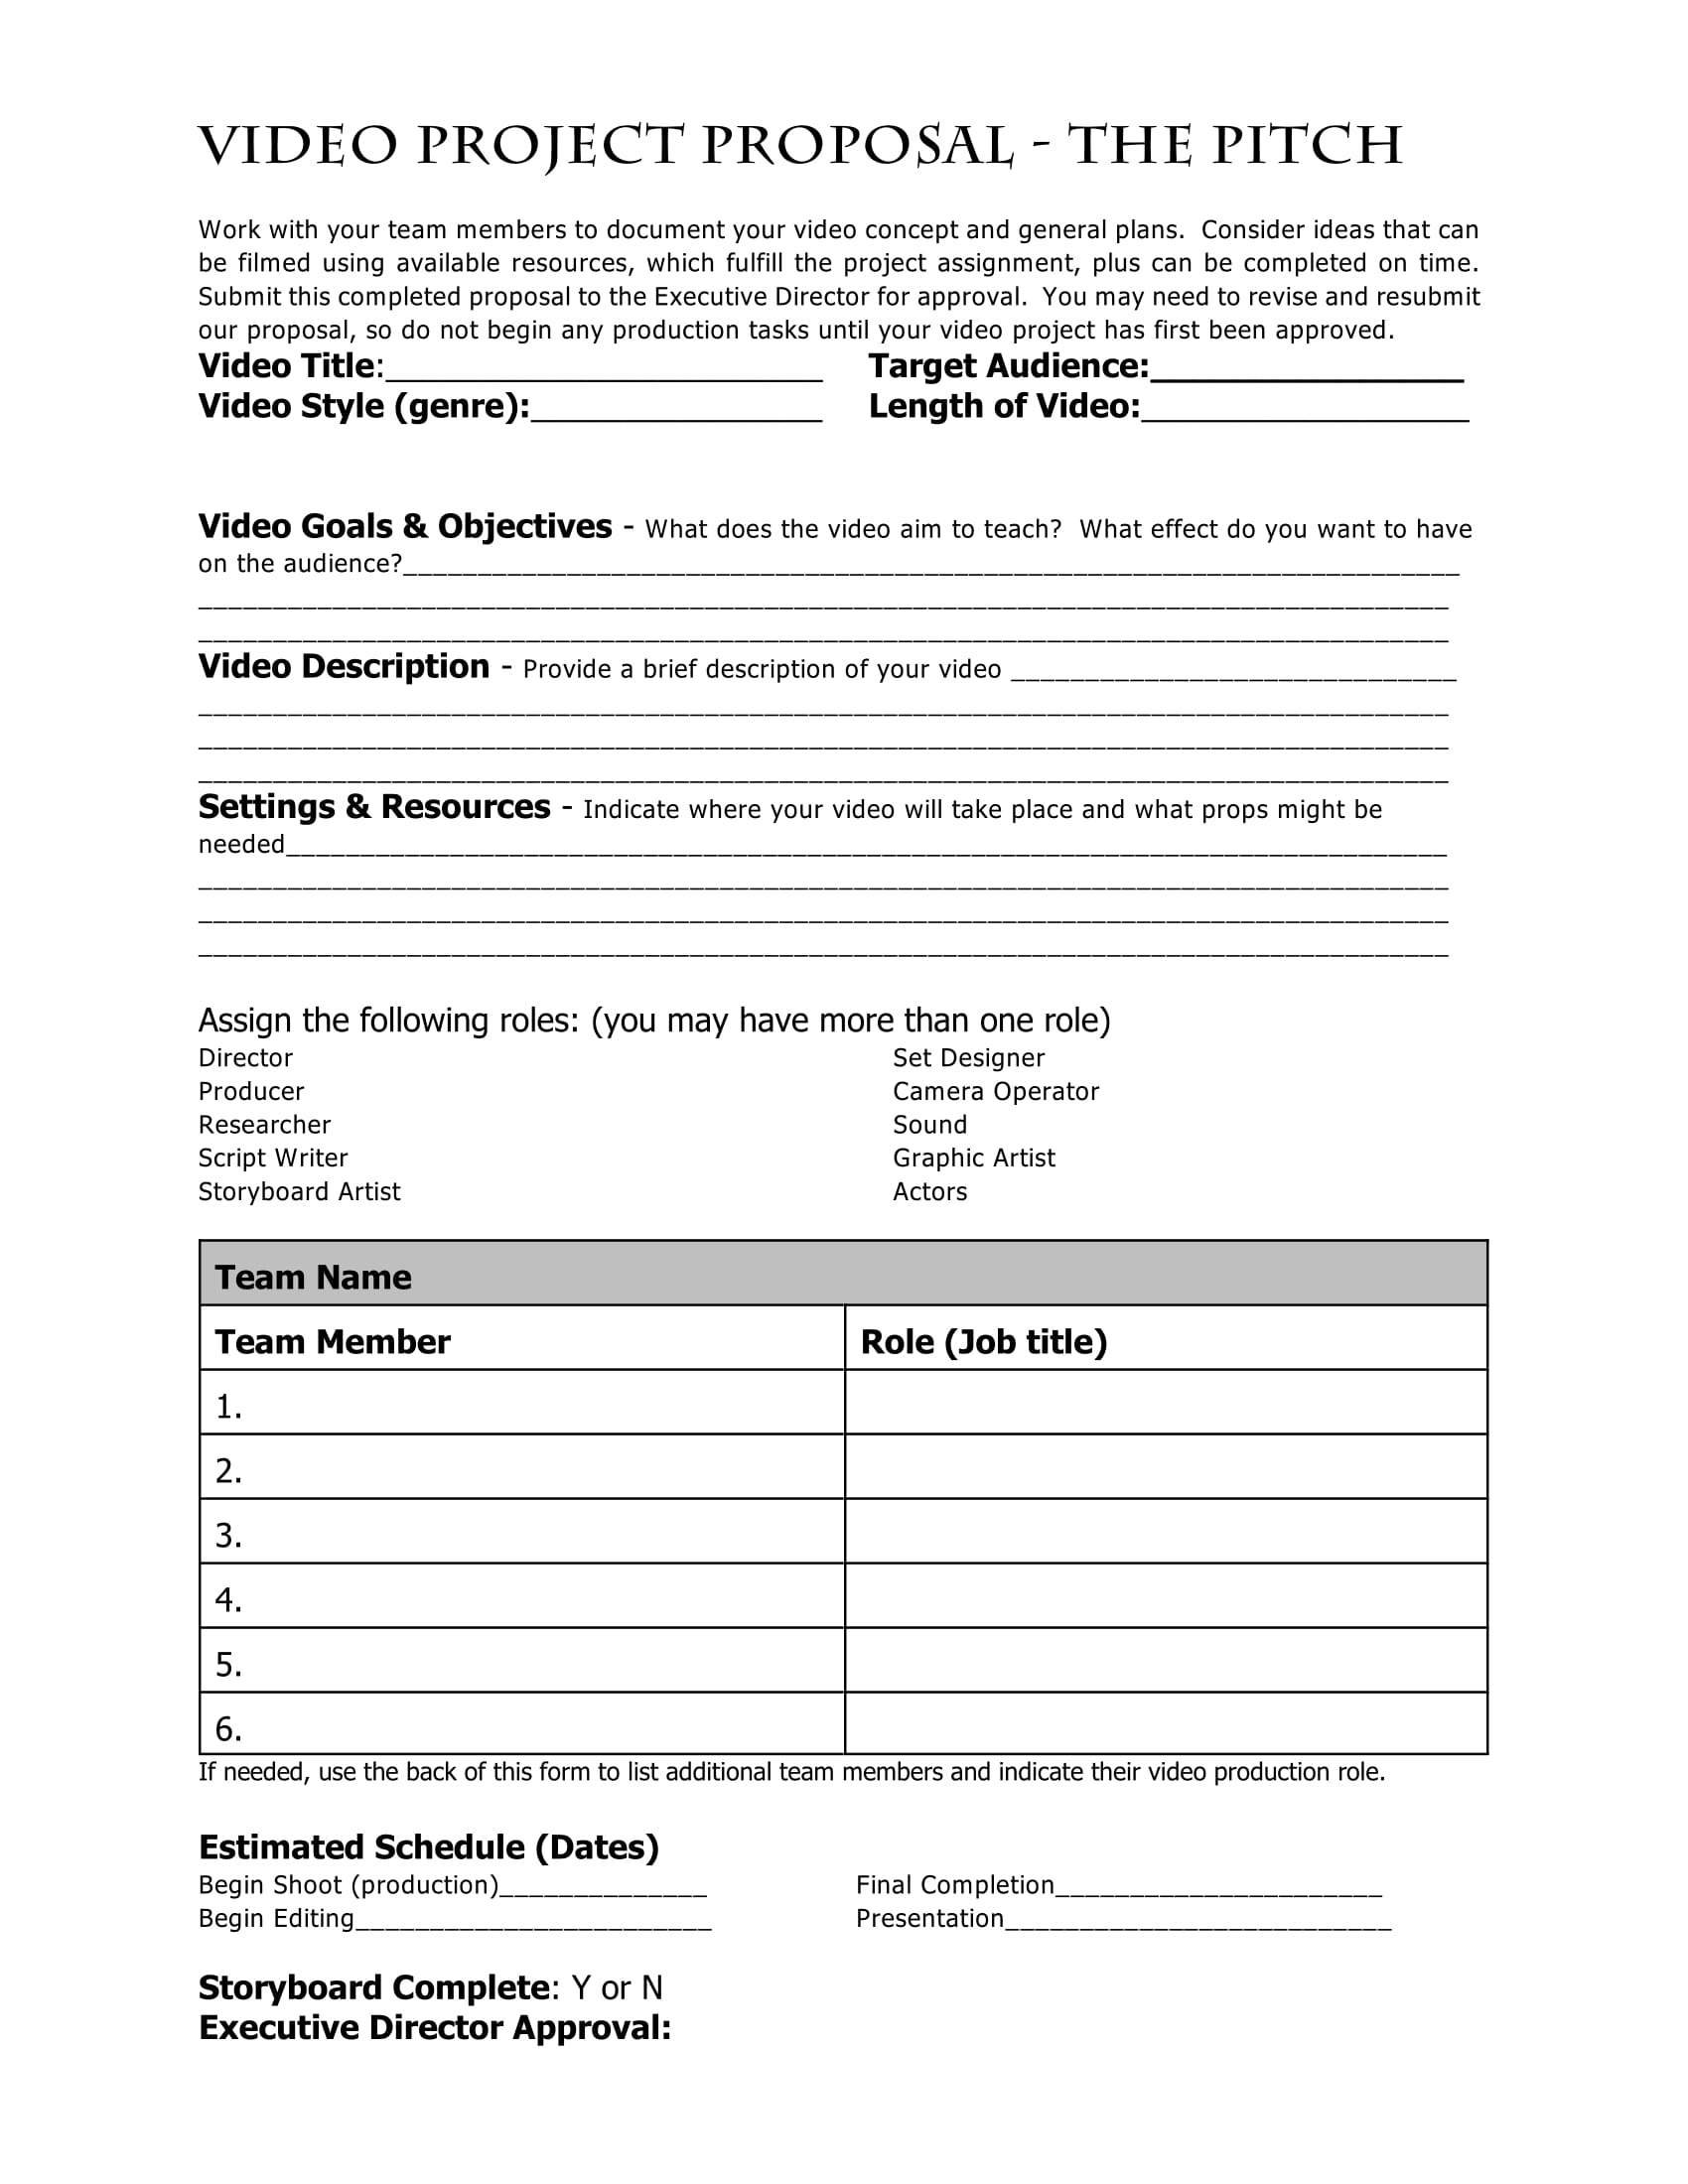 video project proposal form 1